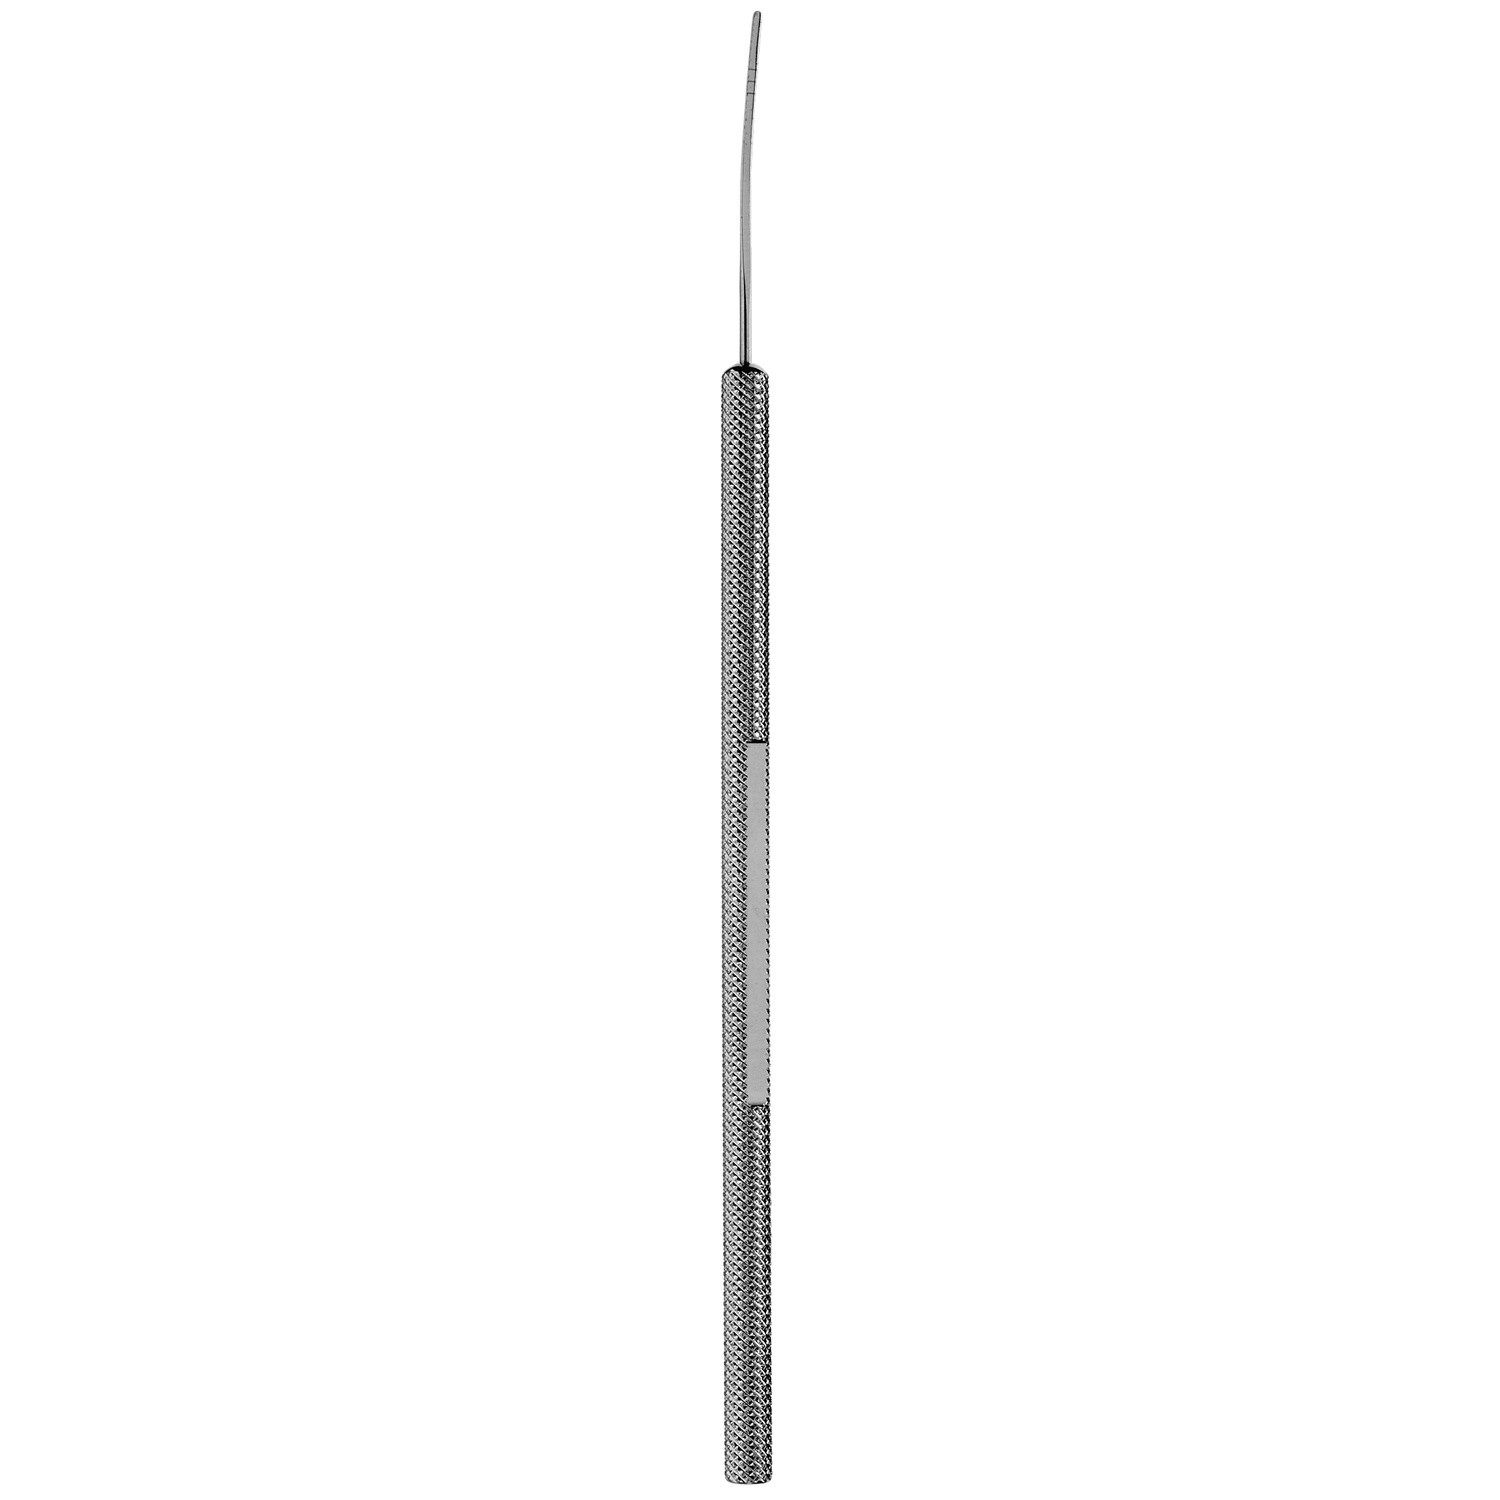 Knolle Lens Nucleus Spatula & Gauge, 30 Mm Blade, With Marking At 5 Mm, 6 Mm & 7 Mm From Tip, 5" (12.7 Cm)